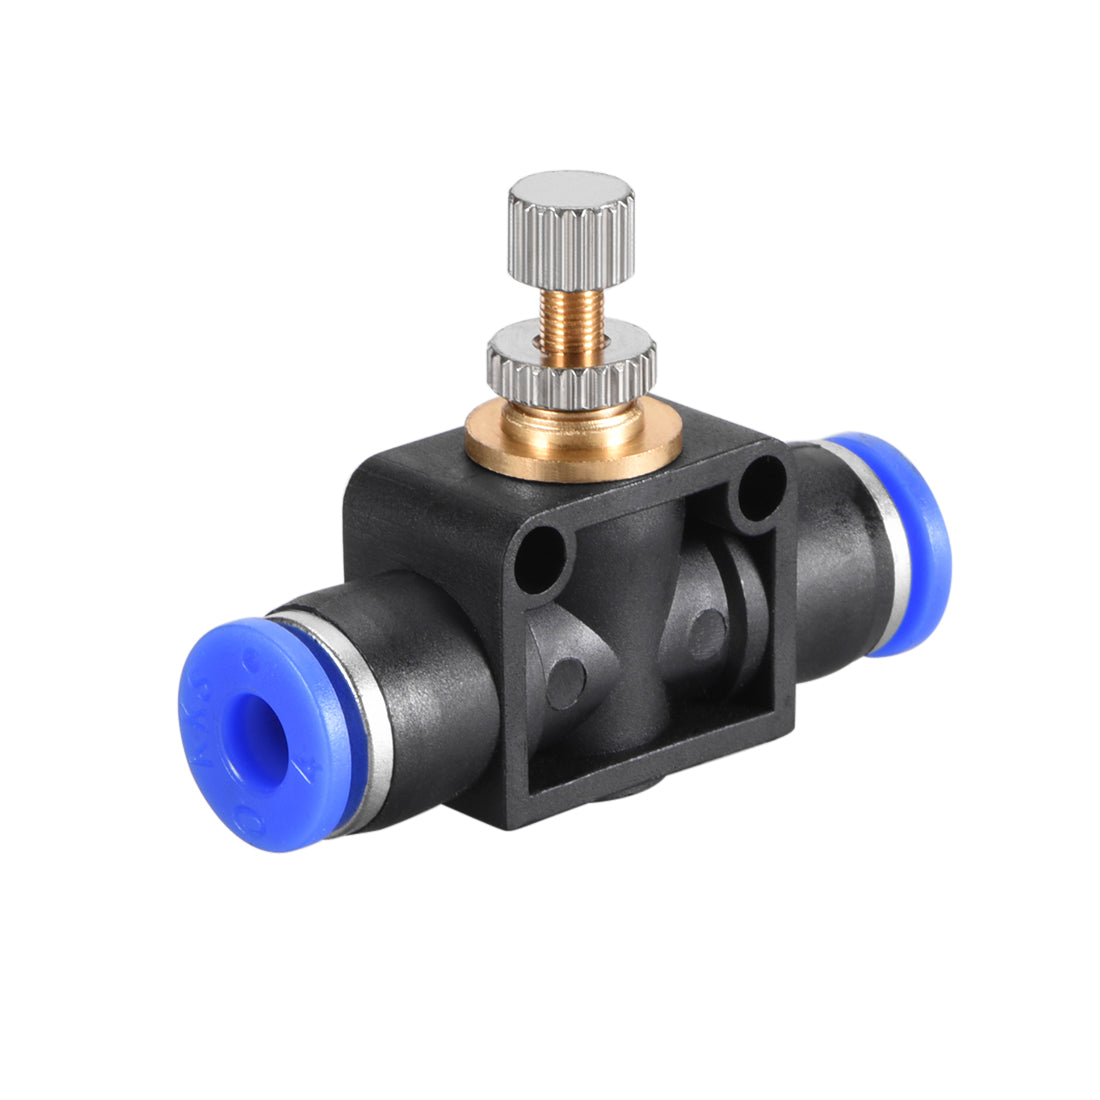 uxcell Uxcell 4mm ID Pneumatic Air Flow Control Valve,Flow In-Line,Speed Controller Valve